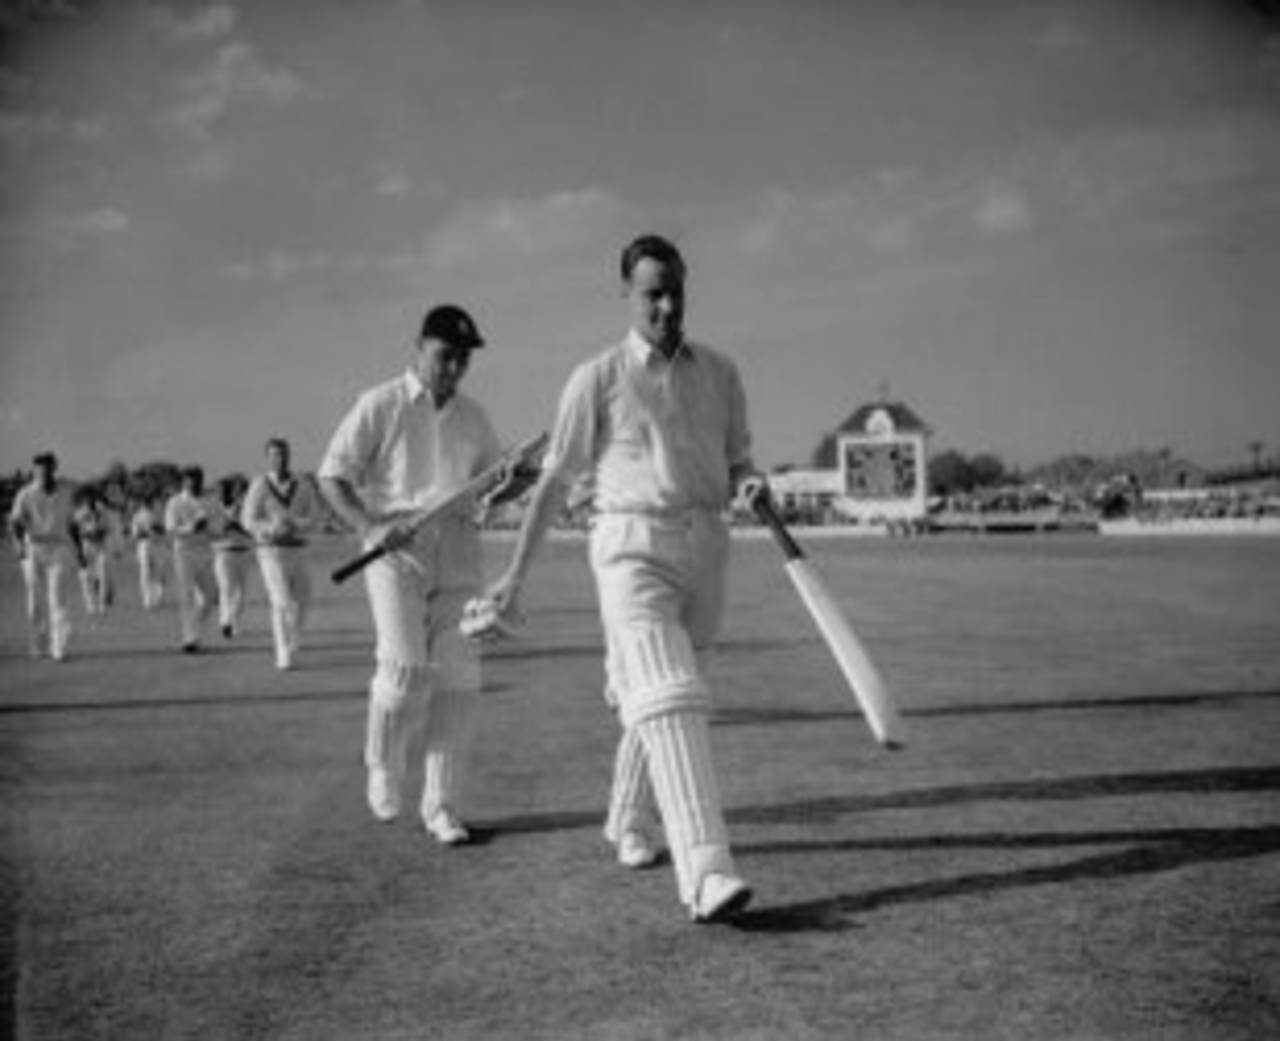 Peter May and Colin Cowdrey return to the pavilion during their stand of 411, England v West Indies, Edgbaston, 1957